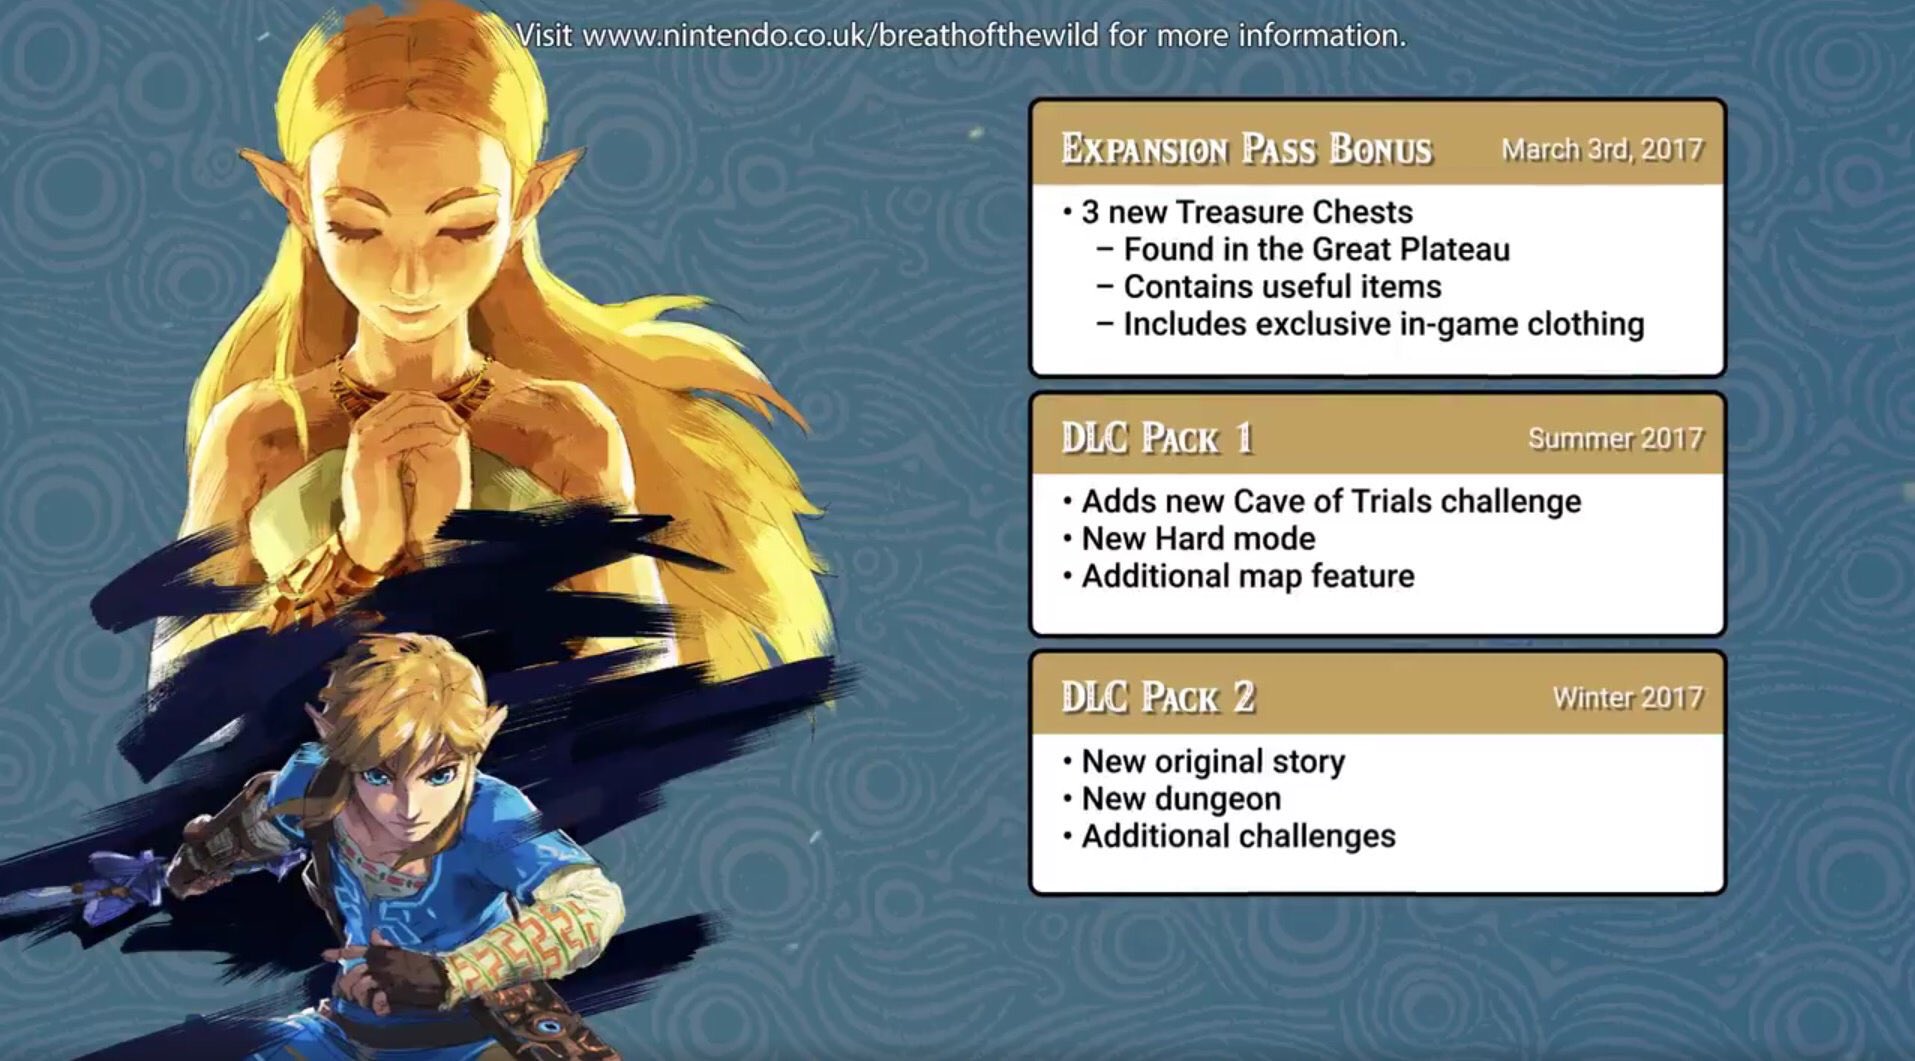 Zelda: Breath of the Wild will have a DLC Expansion Pass